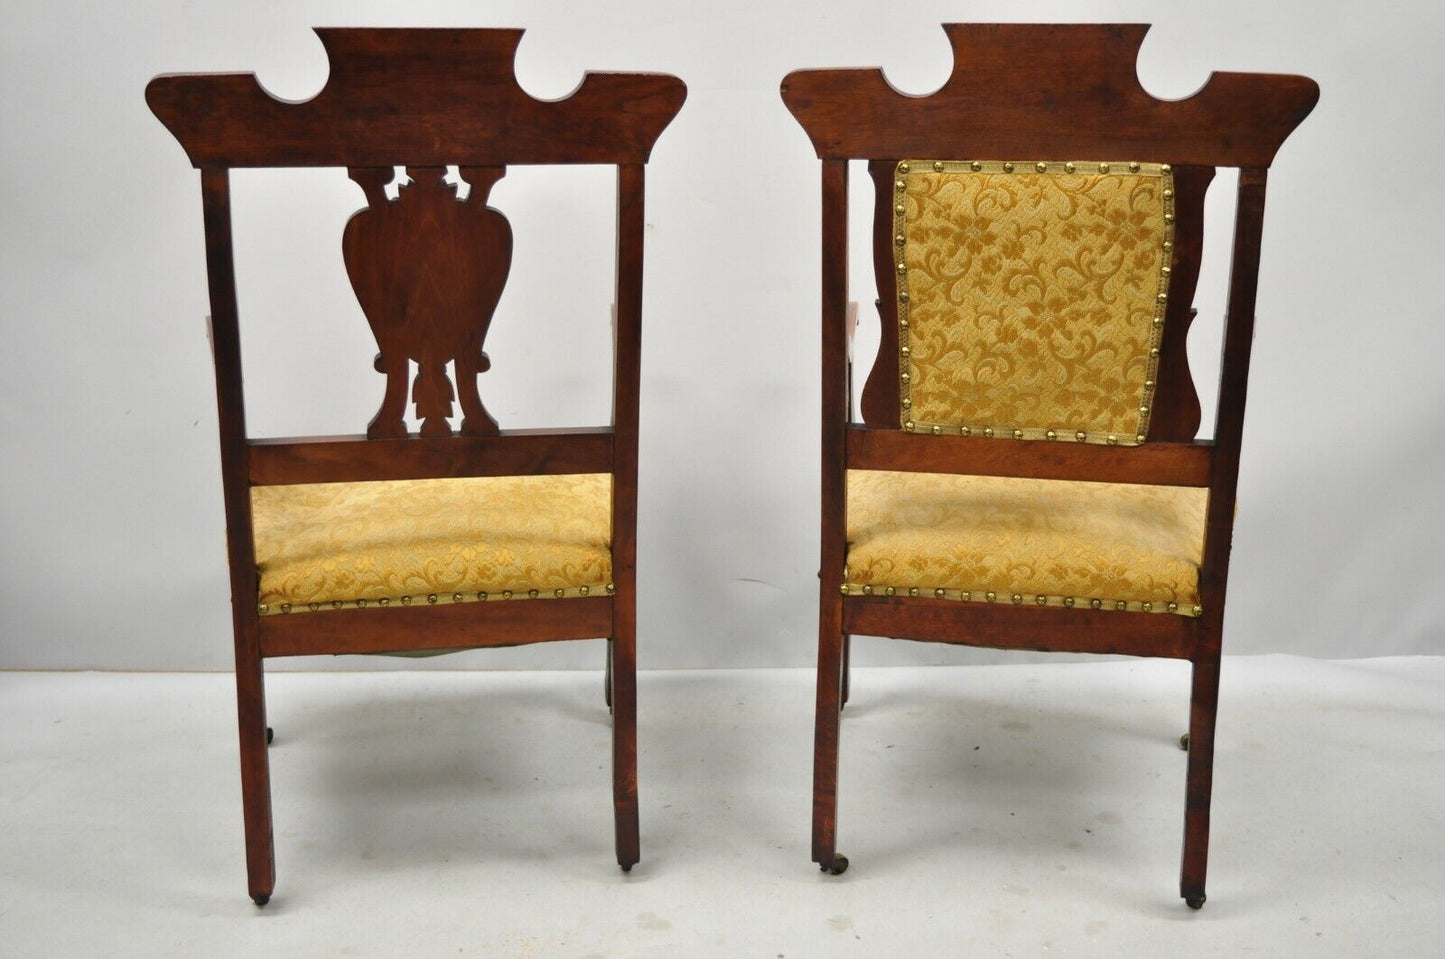 Pair of Antique Eastlake Victorian Mahogany Inlaid Parlor Arm Chairs